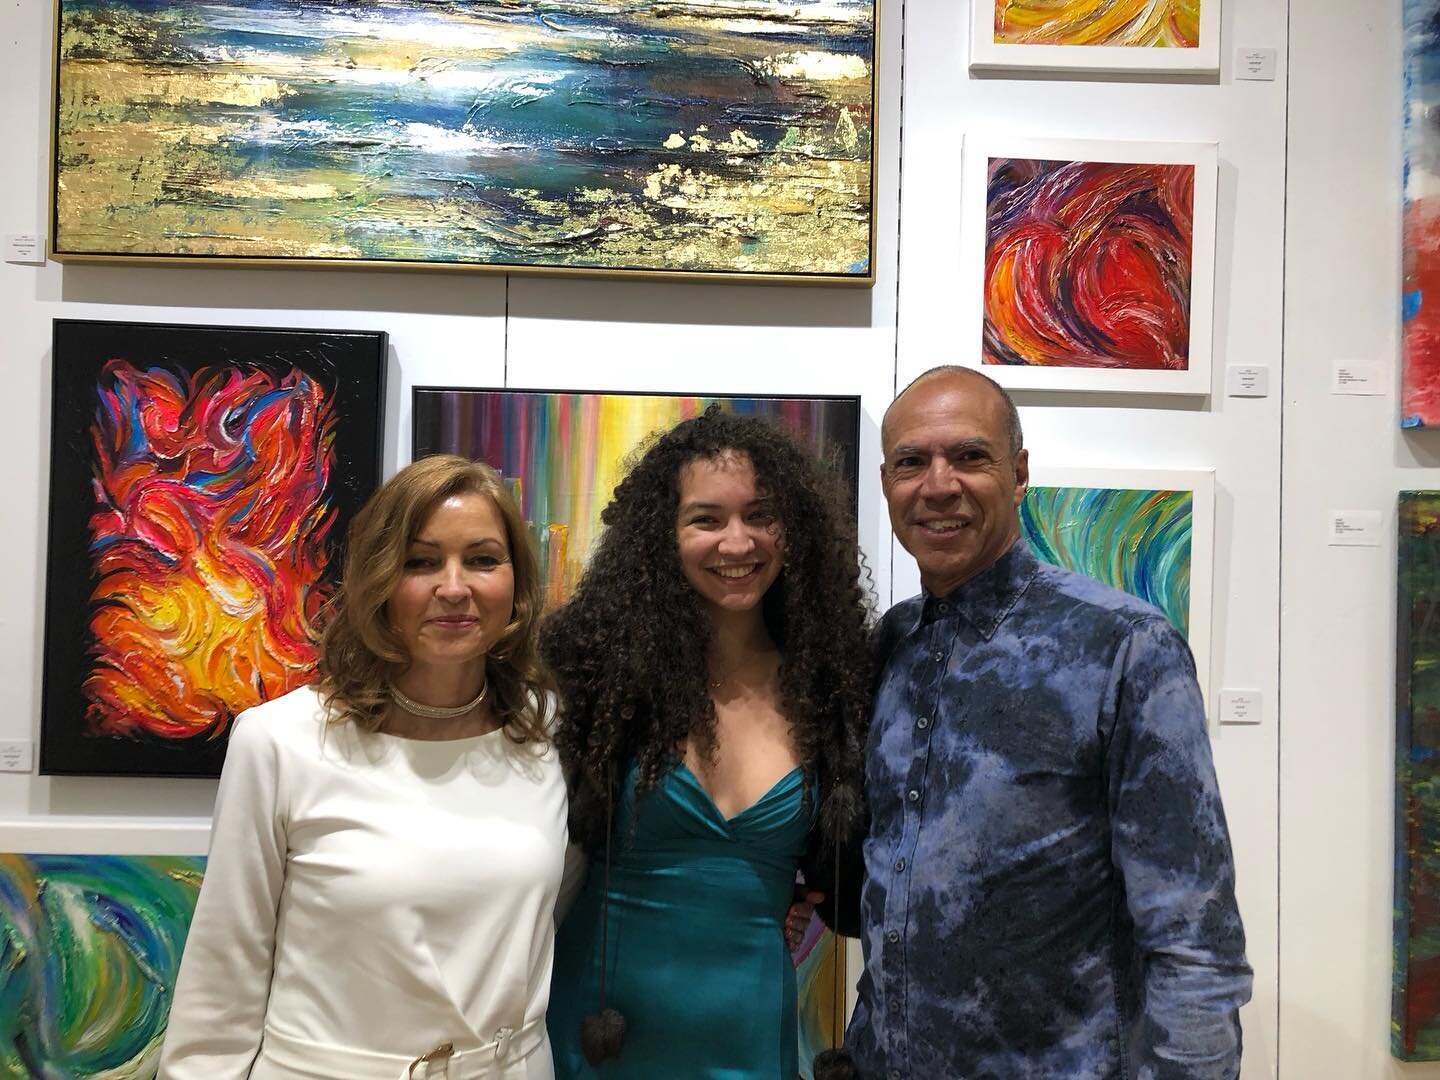 Fantastic evening at the gallery opening with @undertherainbowevents
Open now for 5 weeks in Bluewater shopping centre.

#abstractart #abstractpainter #paintings #abstractoftheday #abstractofinstagram
#christianart #christianartist
#abstractlandscape